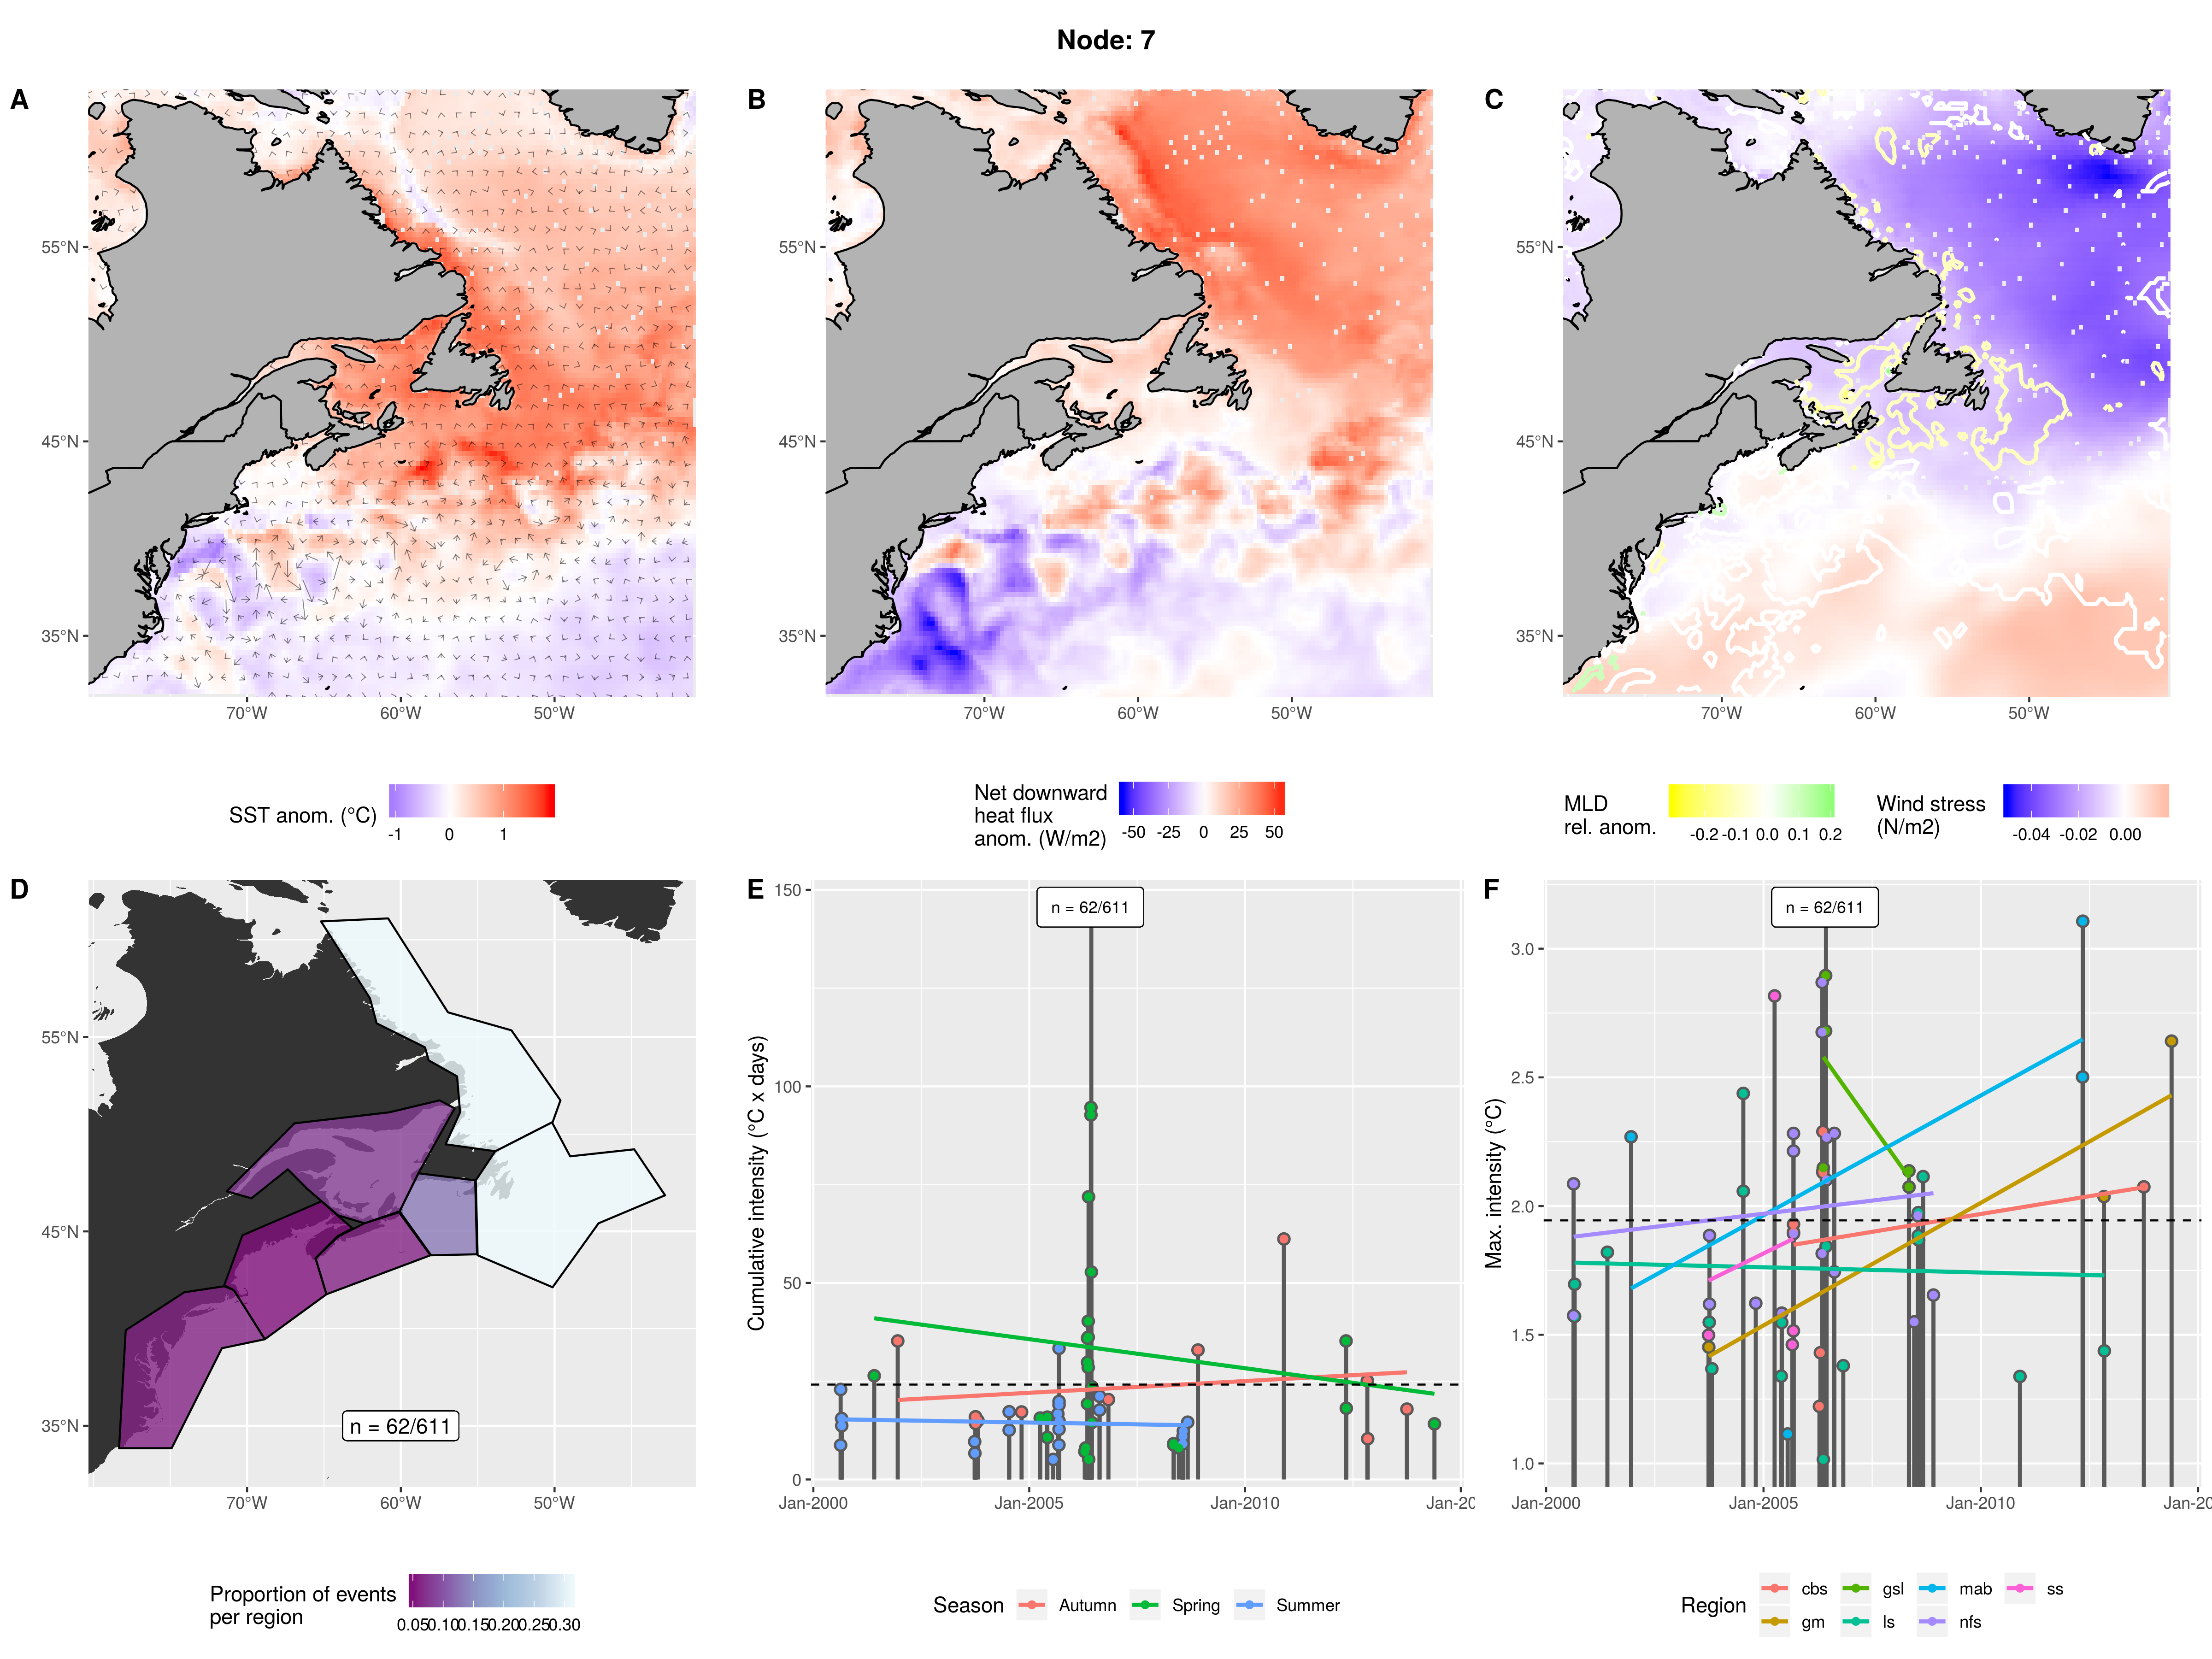 Warm waters from LS to LC to GSL and a cold GS. Strong downward heat flux over northern waters and negative flux over GS. Shallow northern waters with low wind stress while high stress over GS. Equally high in ls and nfs. A bit in cbs but almost none elsewhere. Spring - Autumn from 2000 - 2014. 2006 was a particularly strong year. Events are overall not particularly large.